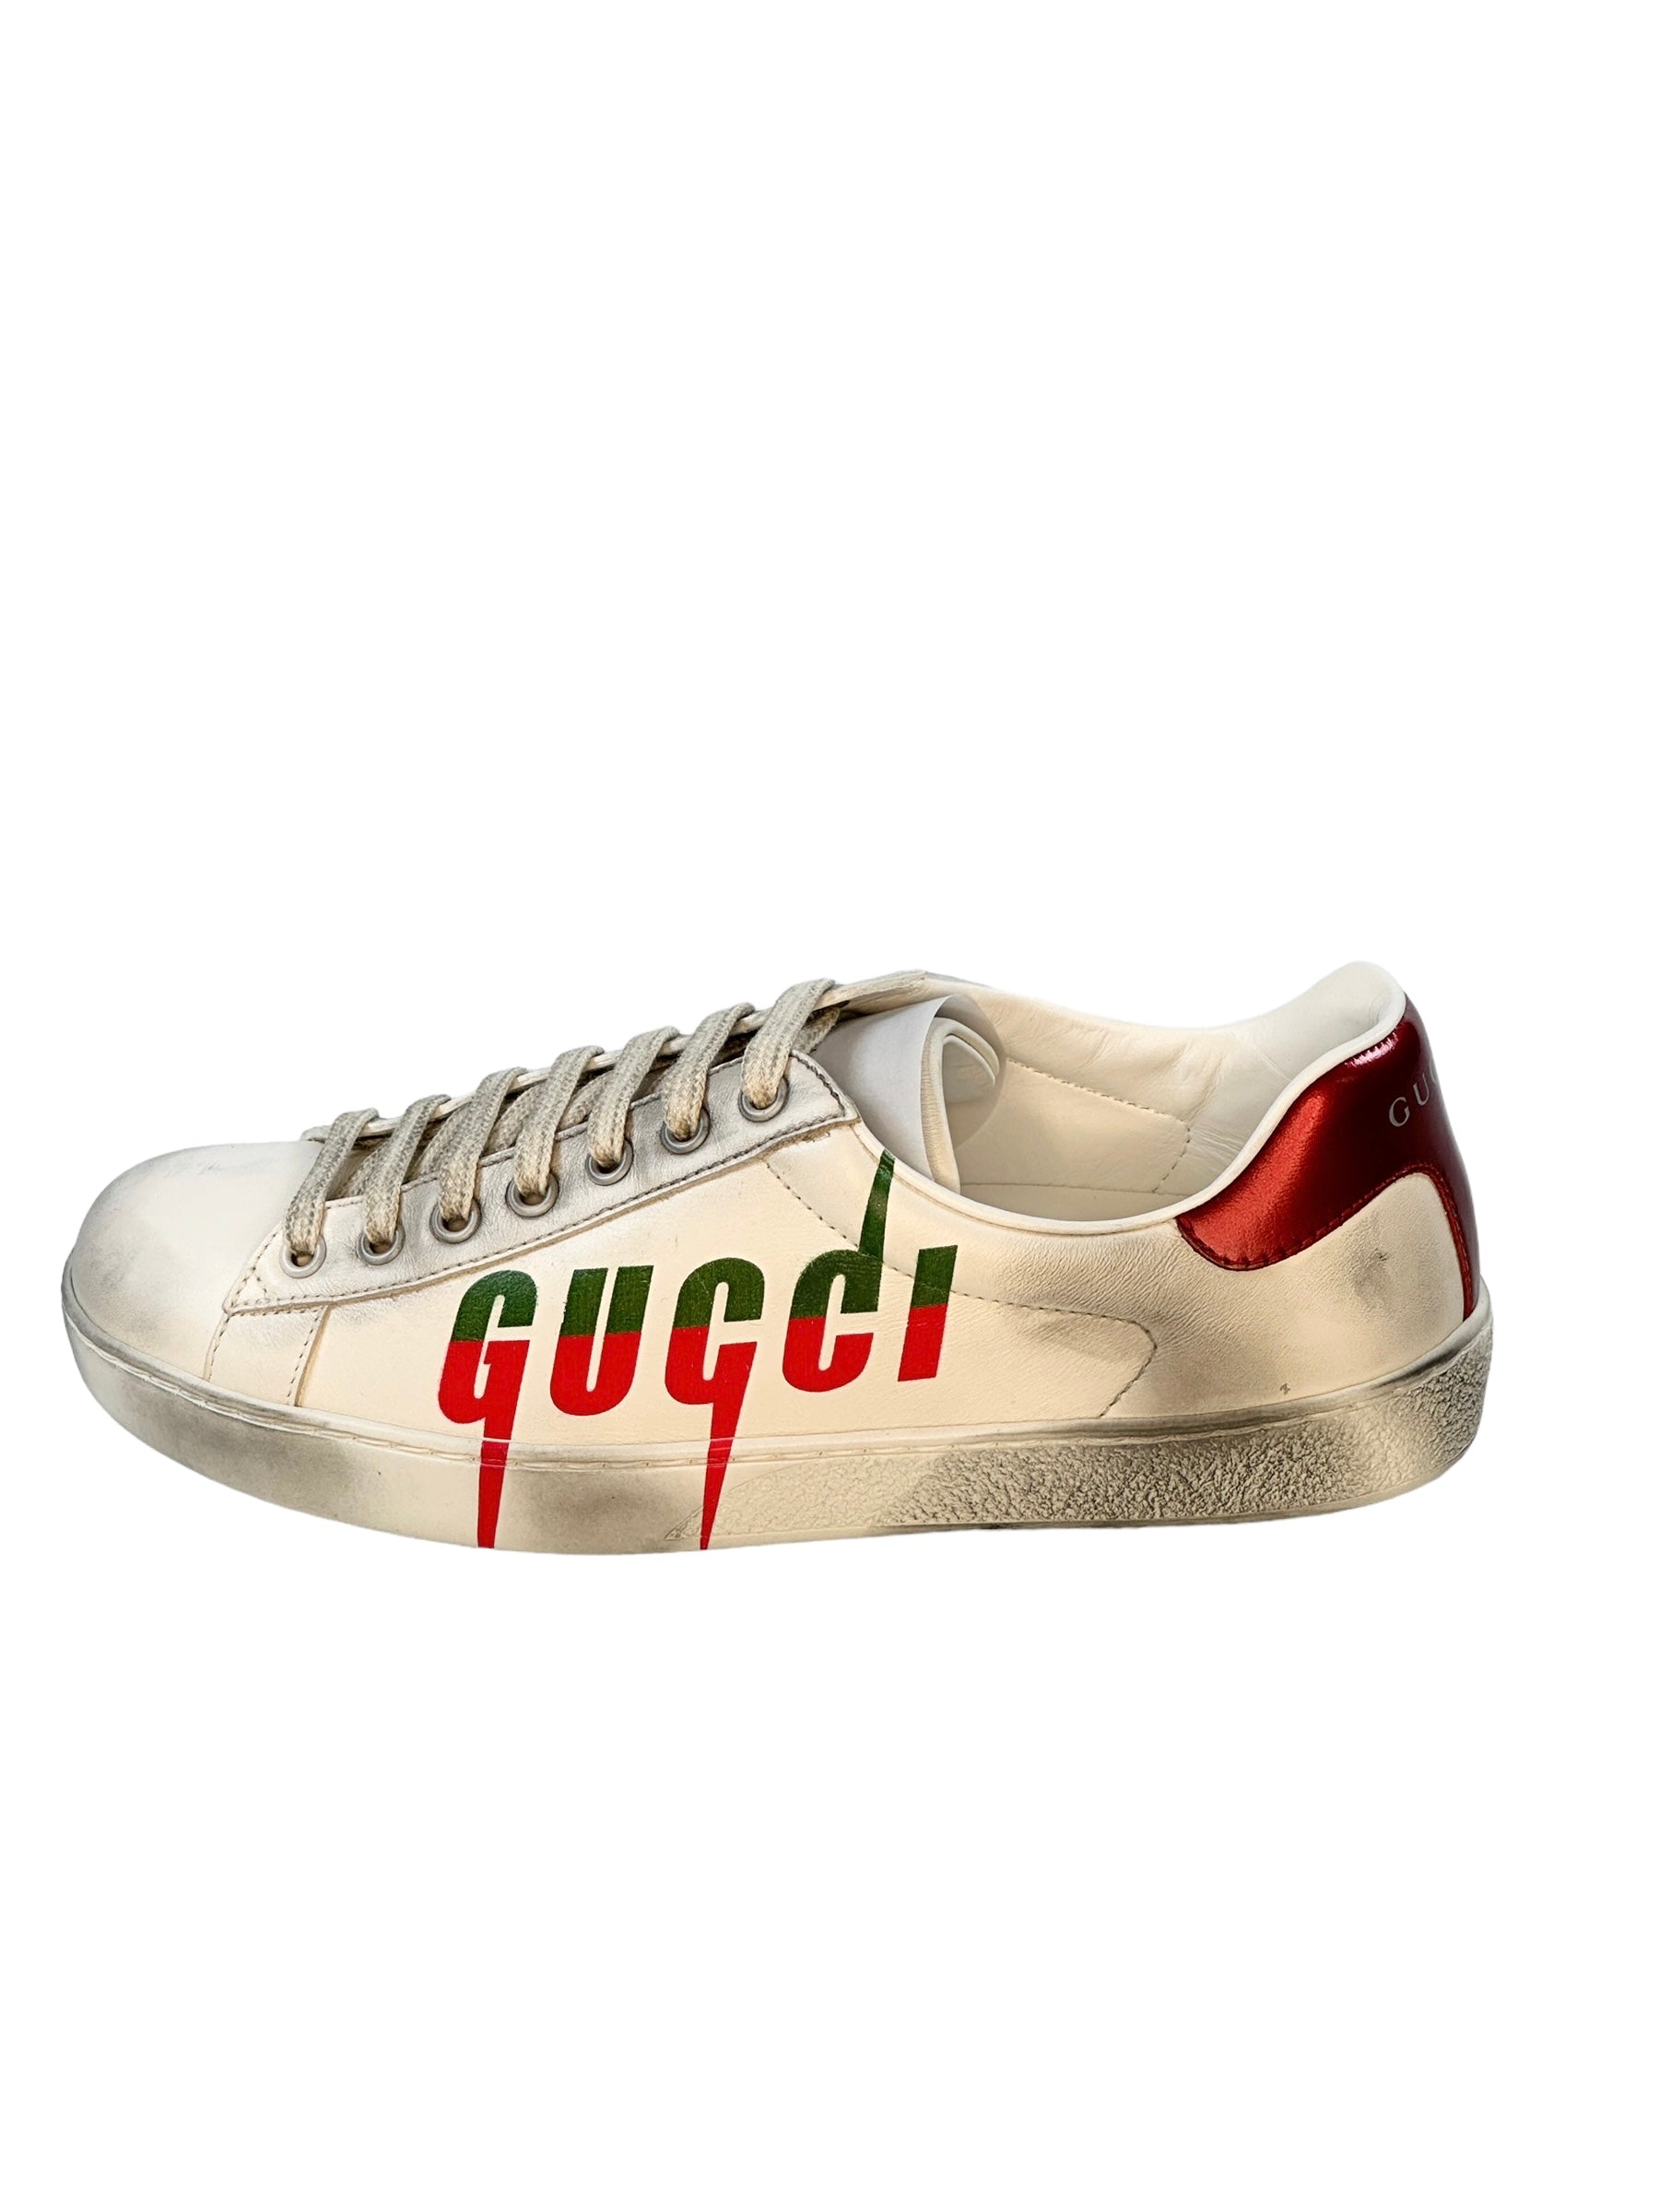 GUCCI Miro Soft Distressed Nappa Sneakers / White/Red